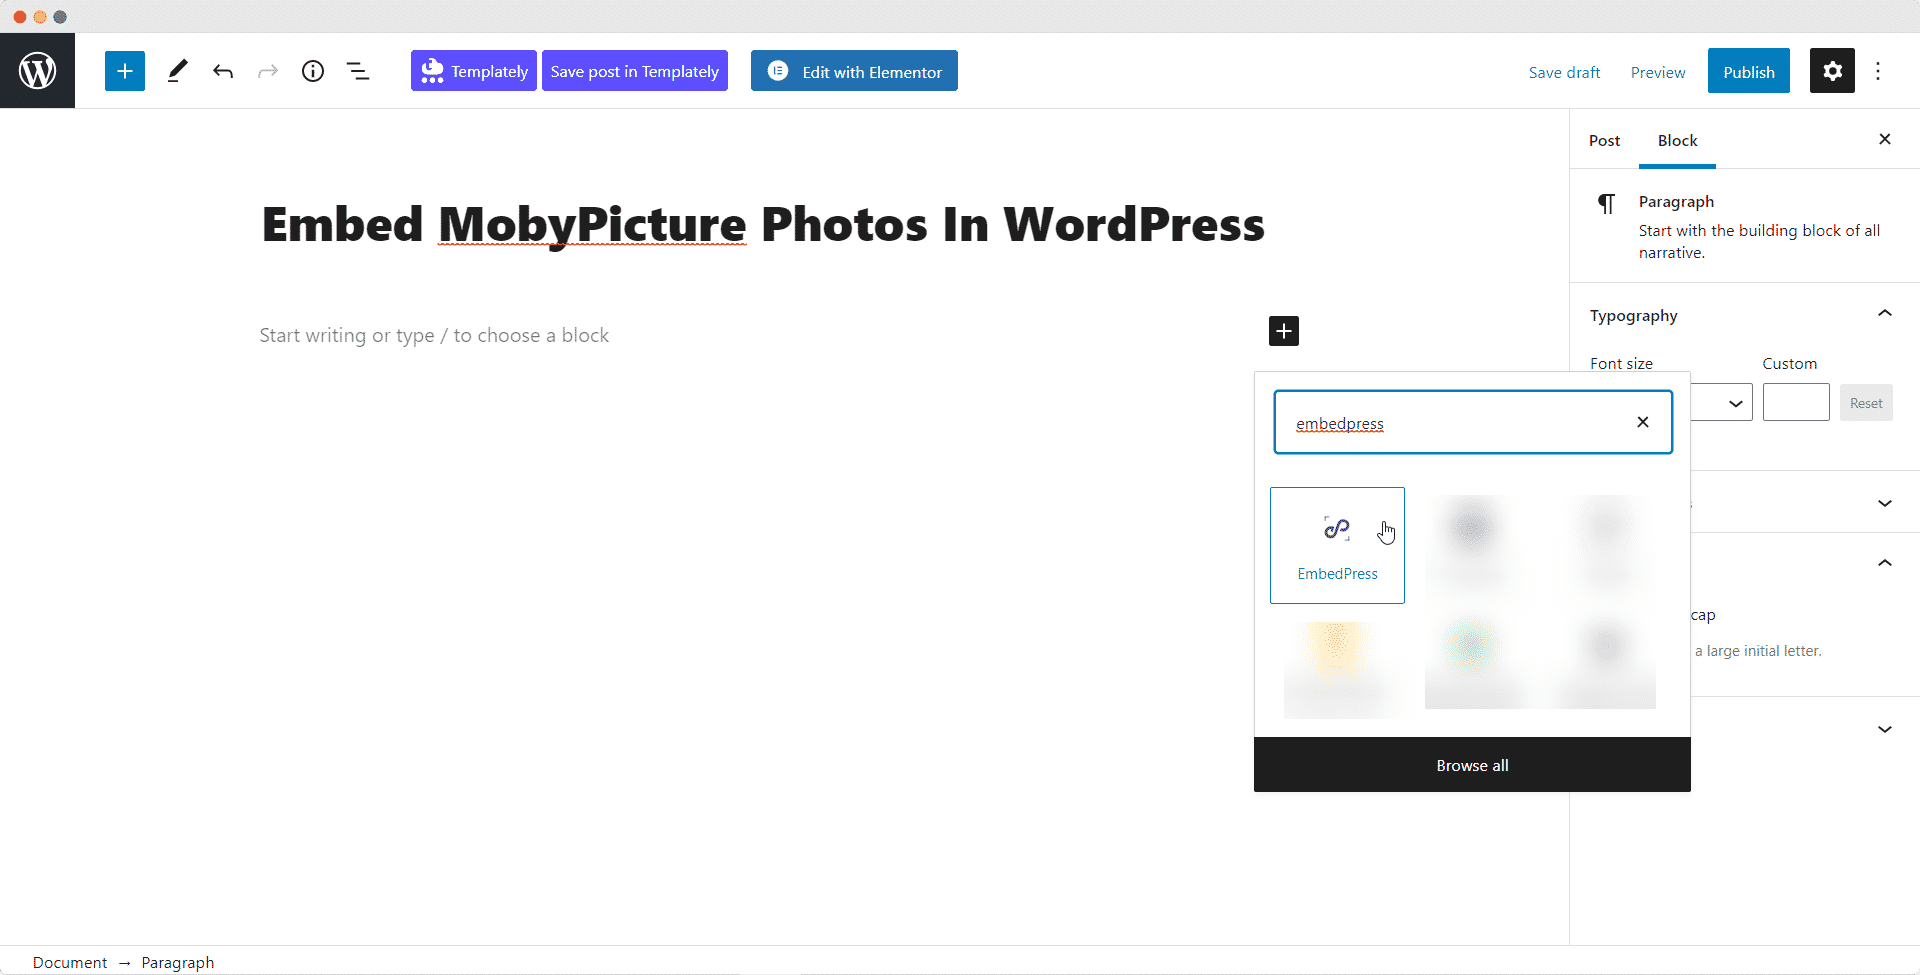 How to Embed MobyPicture Photos in WordPress